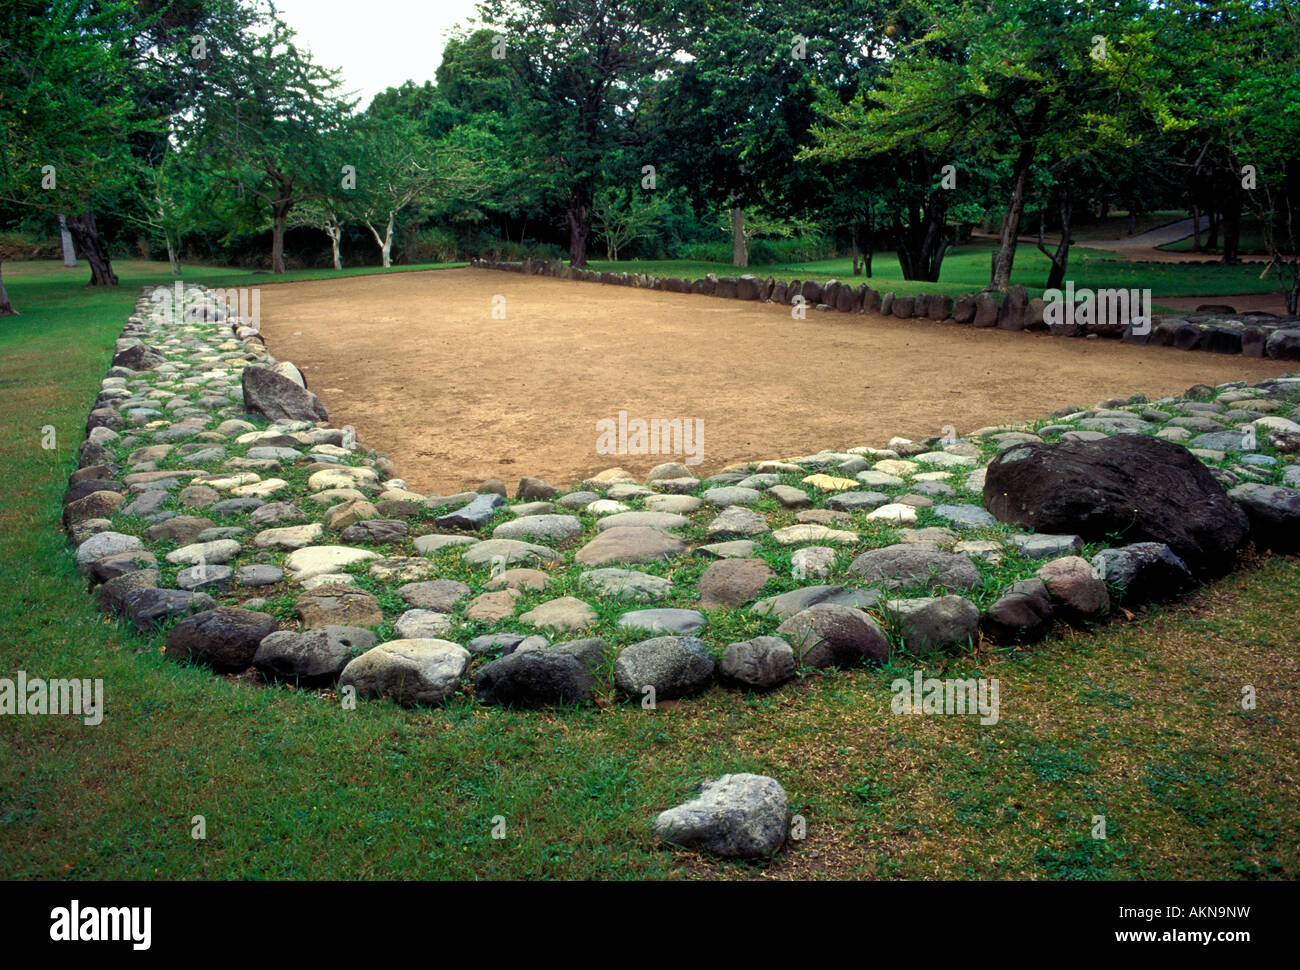 batey, ball court, Tibes Indigenous Ceremonial Center, near, city of Ponce, Puerto Rico Stock Photo